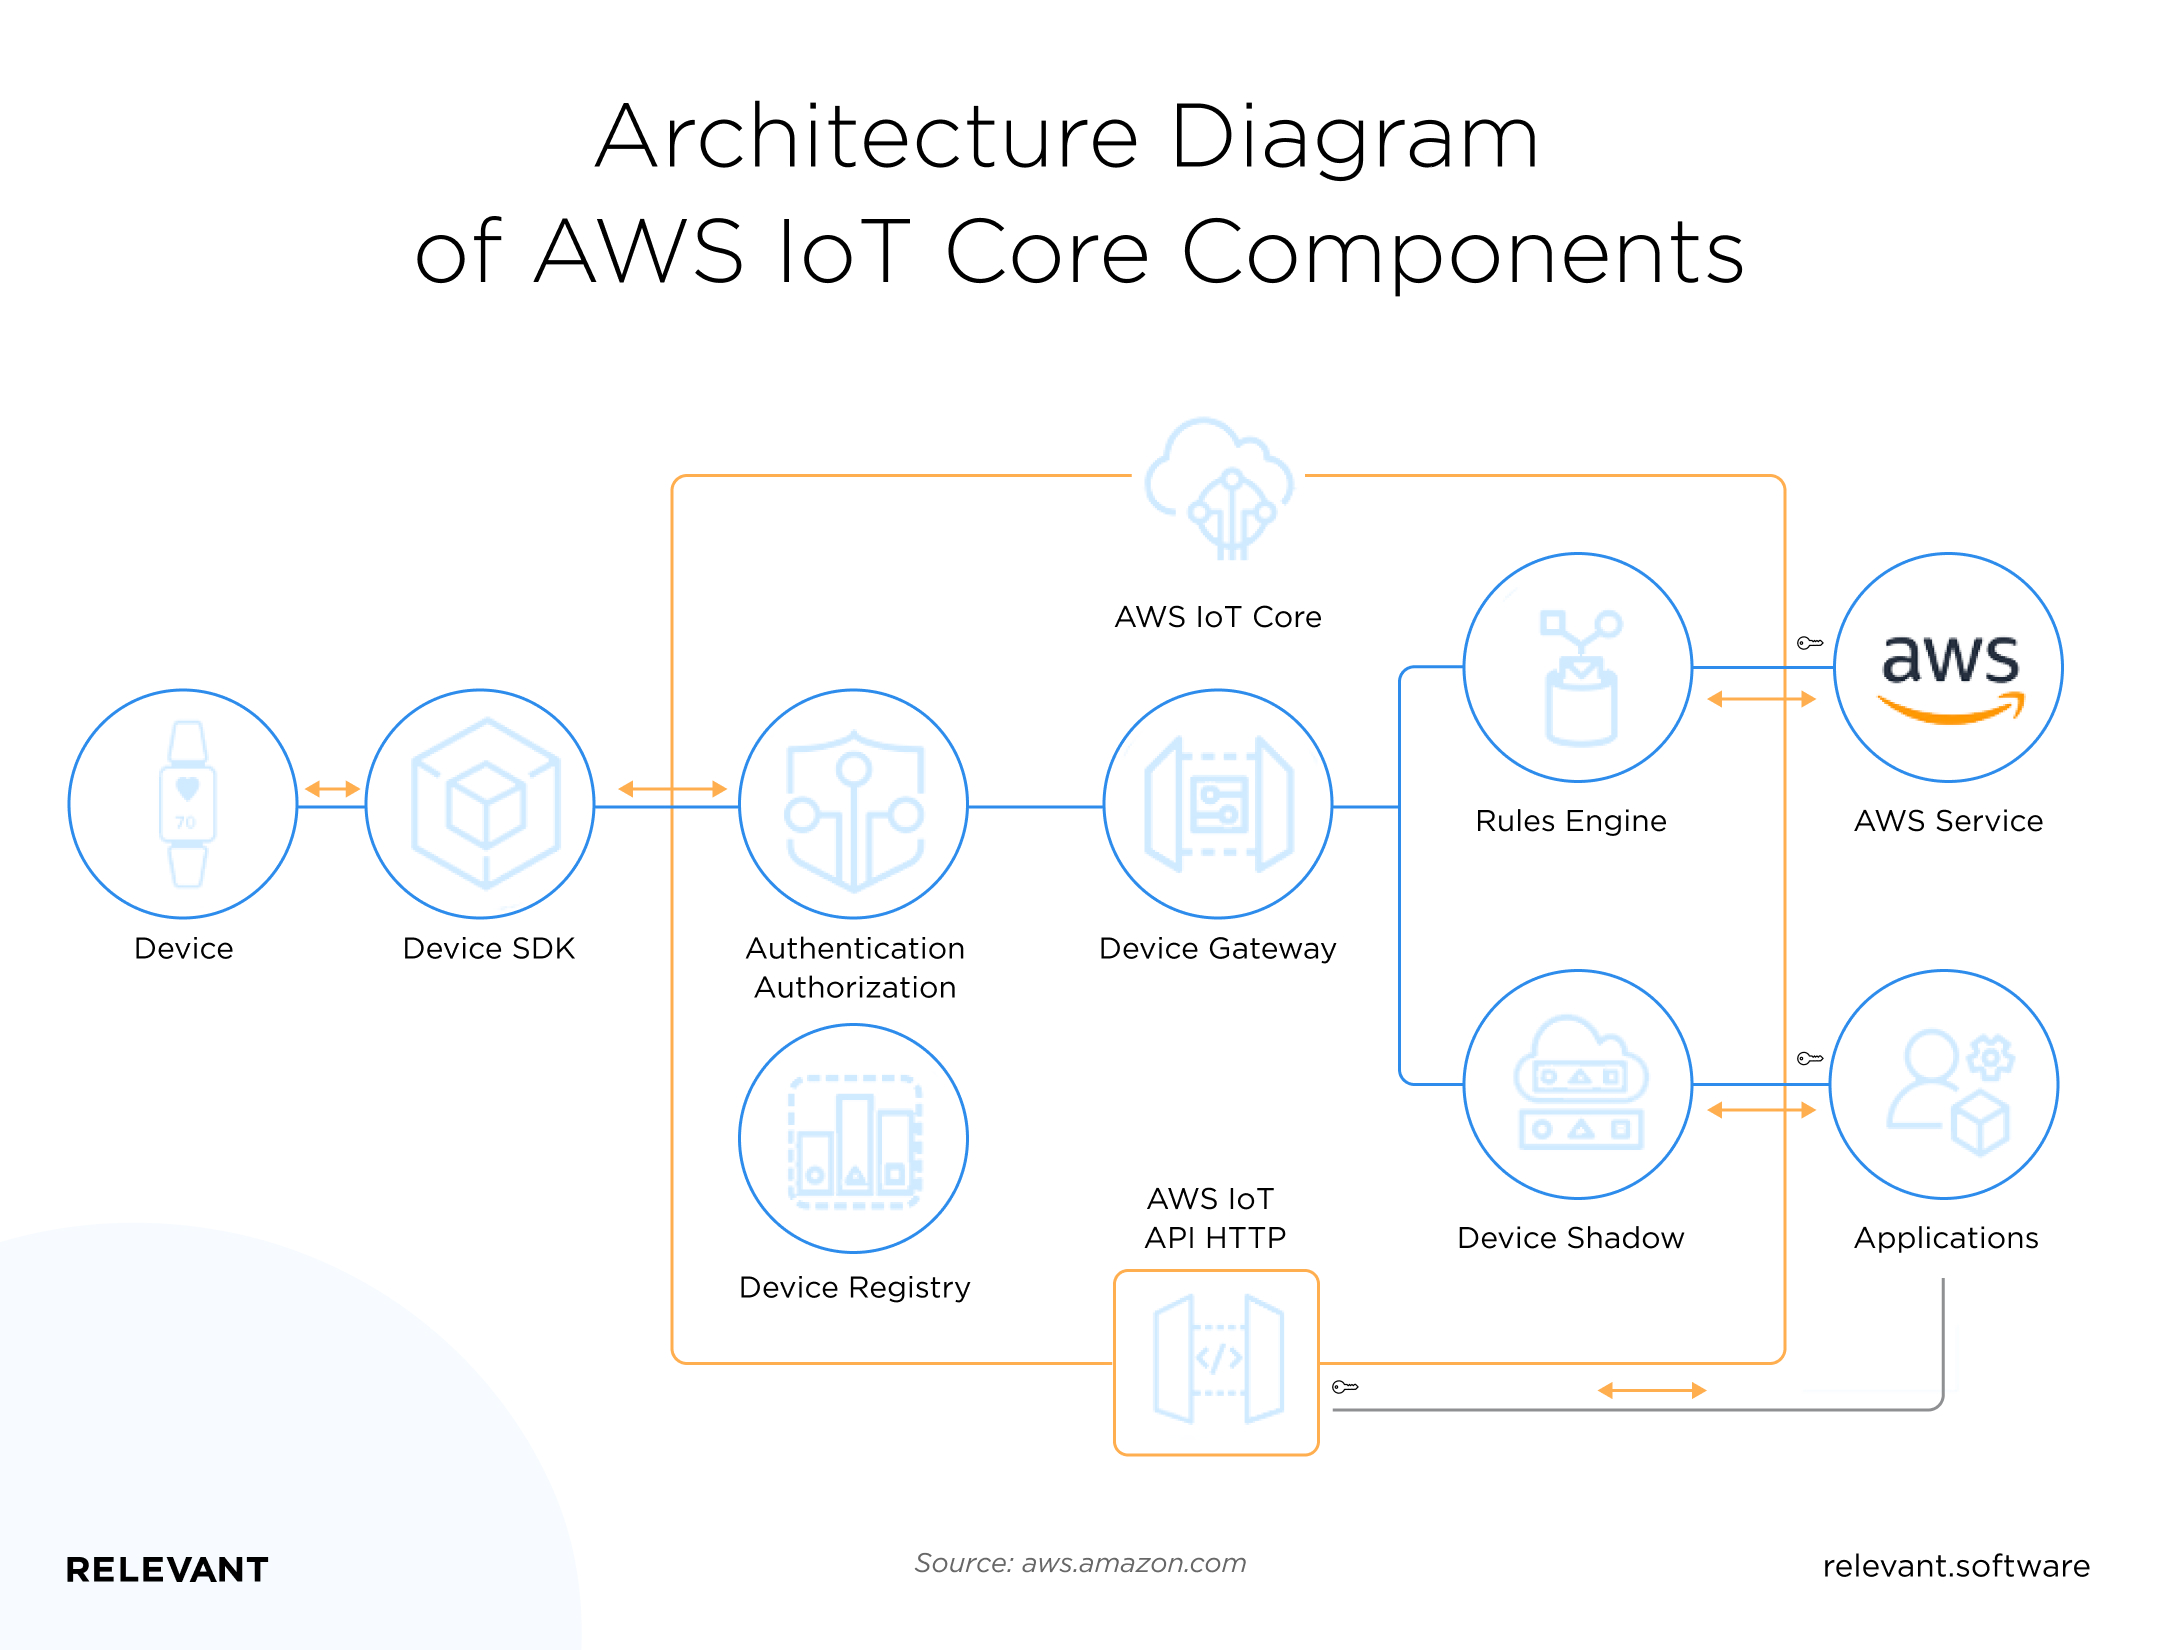 Architecture of AWS IoT Core Components